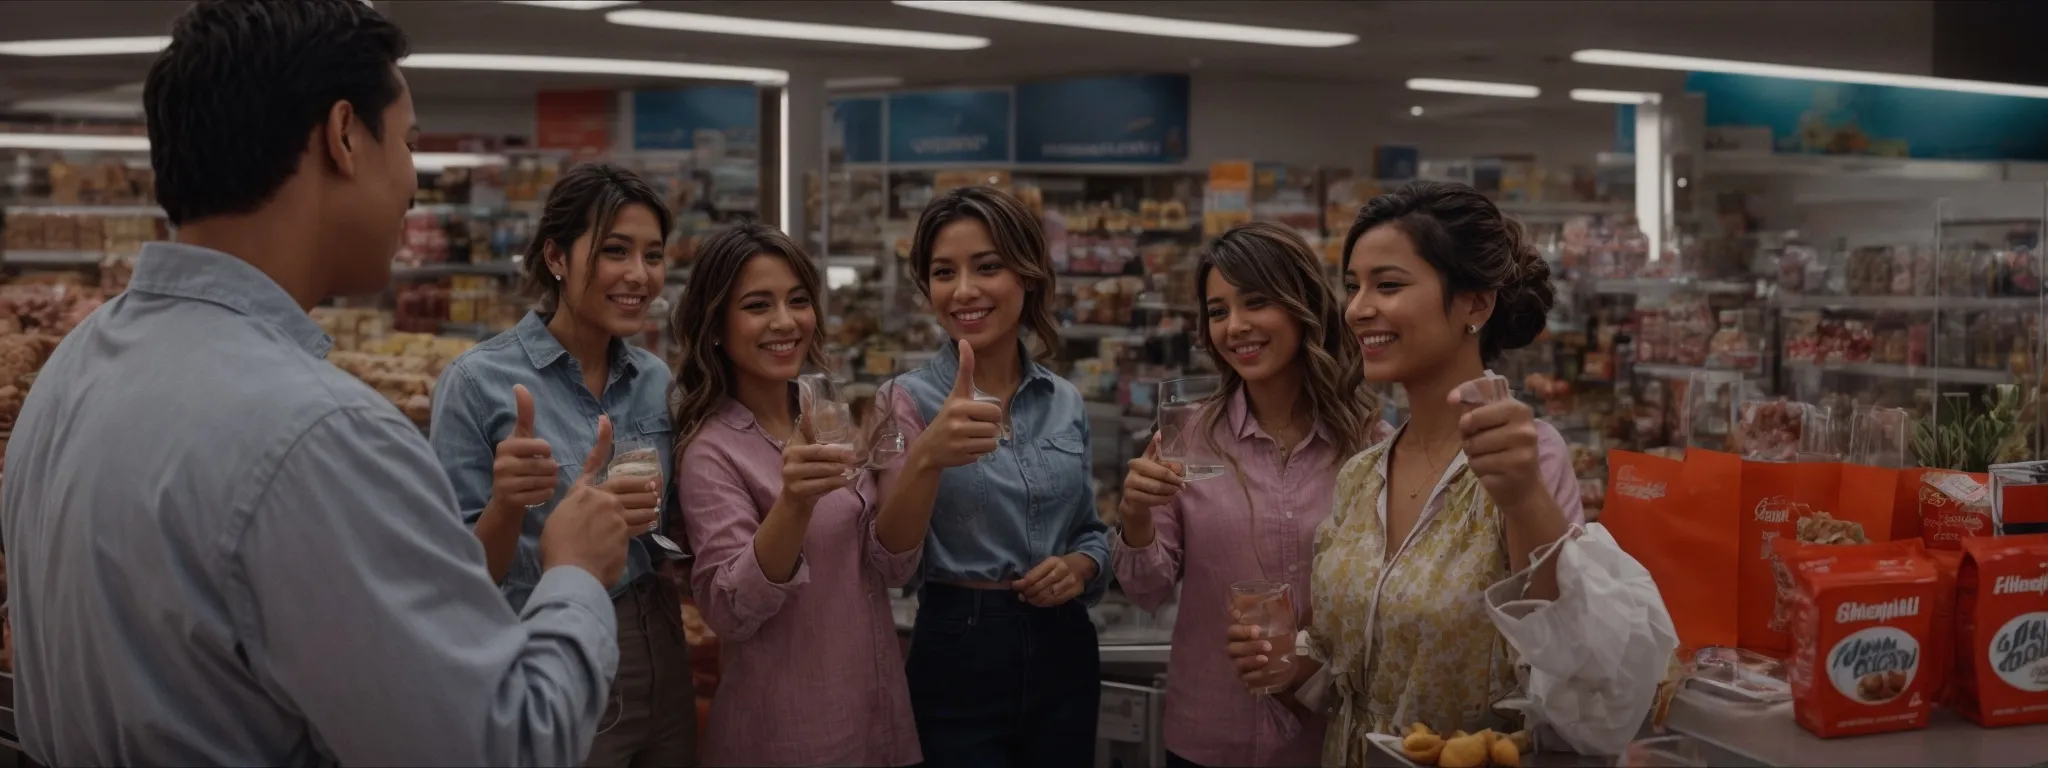 a group of satisfied customers celebrates a product with thumbs up in a bright, inviting store.